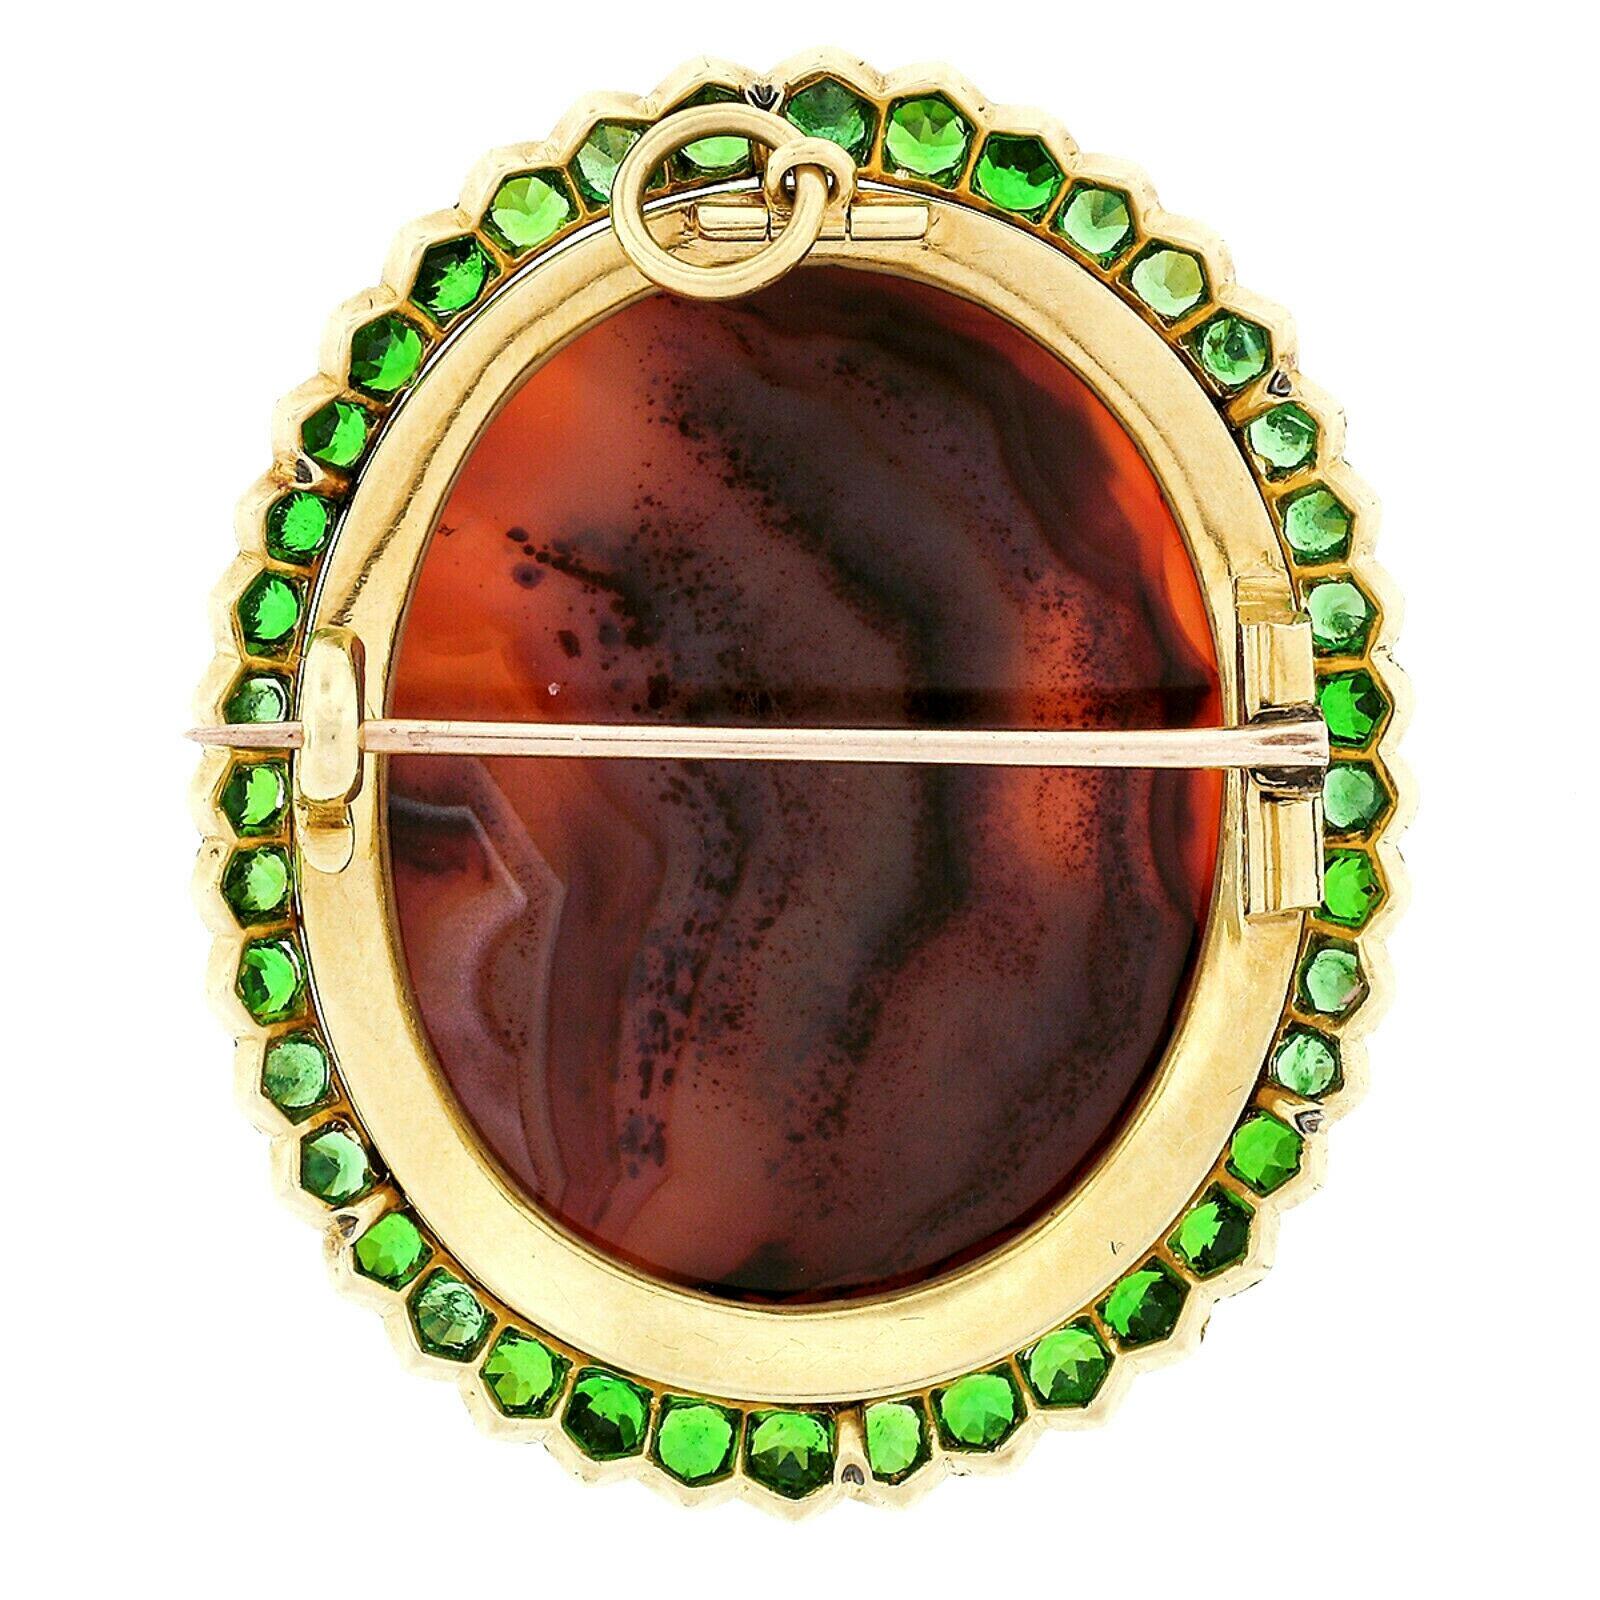 Women's or Men's Large 18 Karat Gold Carved Agate Male Cameo Brooch Pendant with Tsavorite Halo